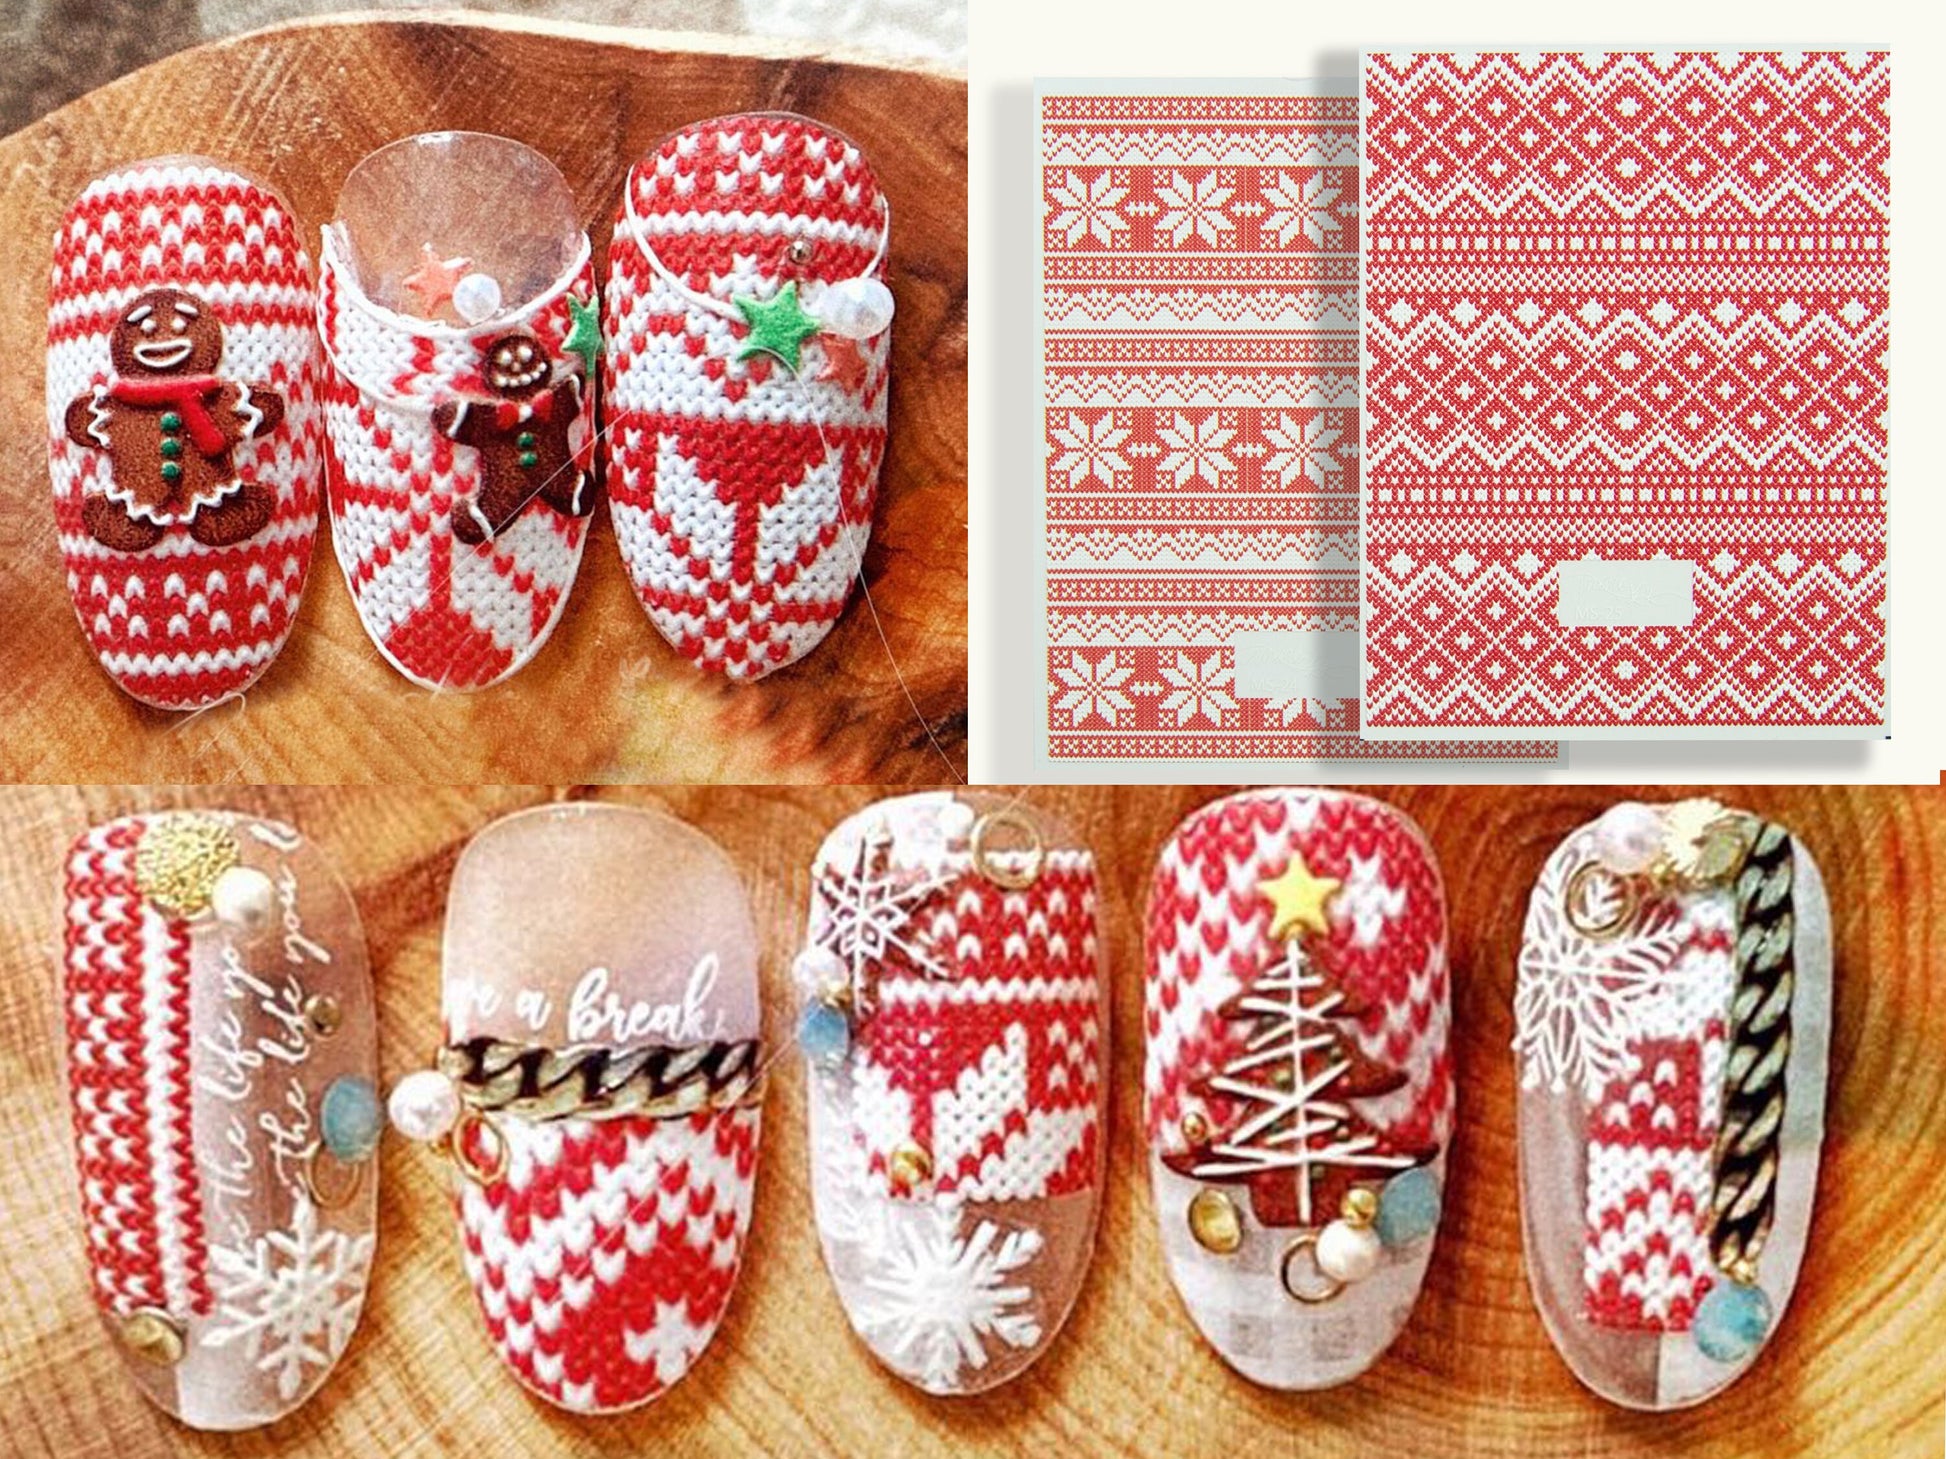 Red Christmas Knitted Sweater Pattern Nail Art Stickers